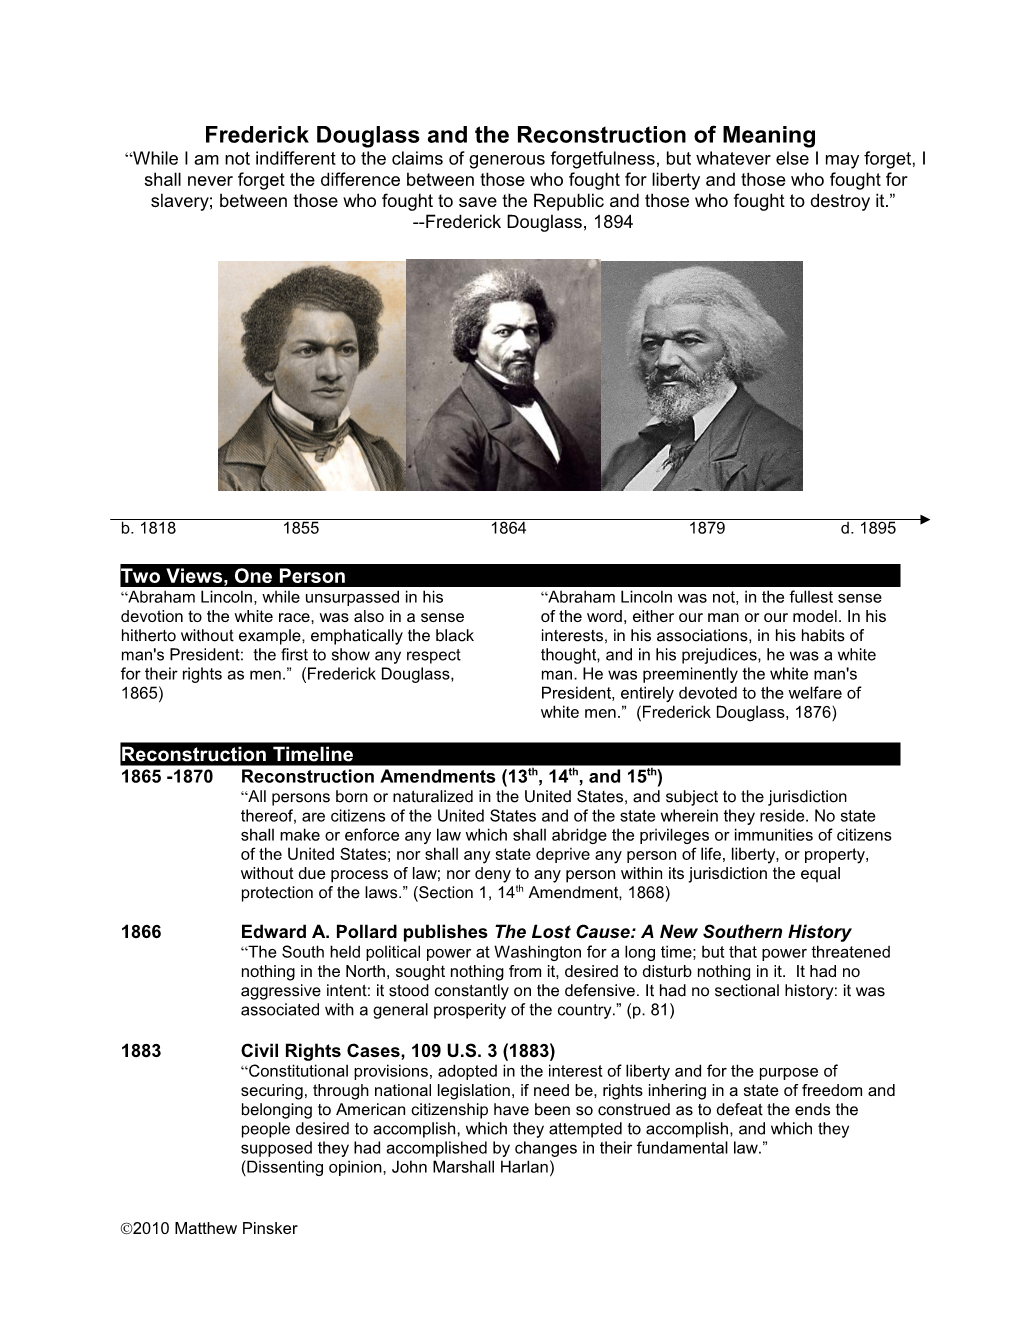 The Other Lincoln Douglass Debates